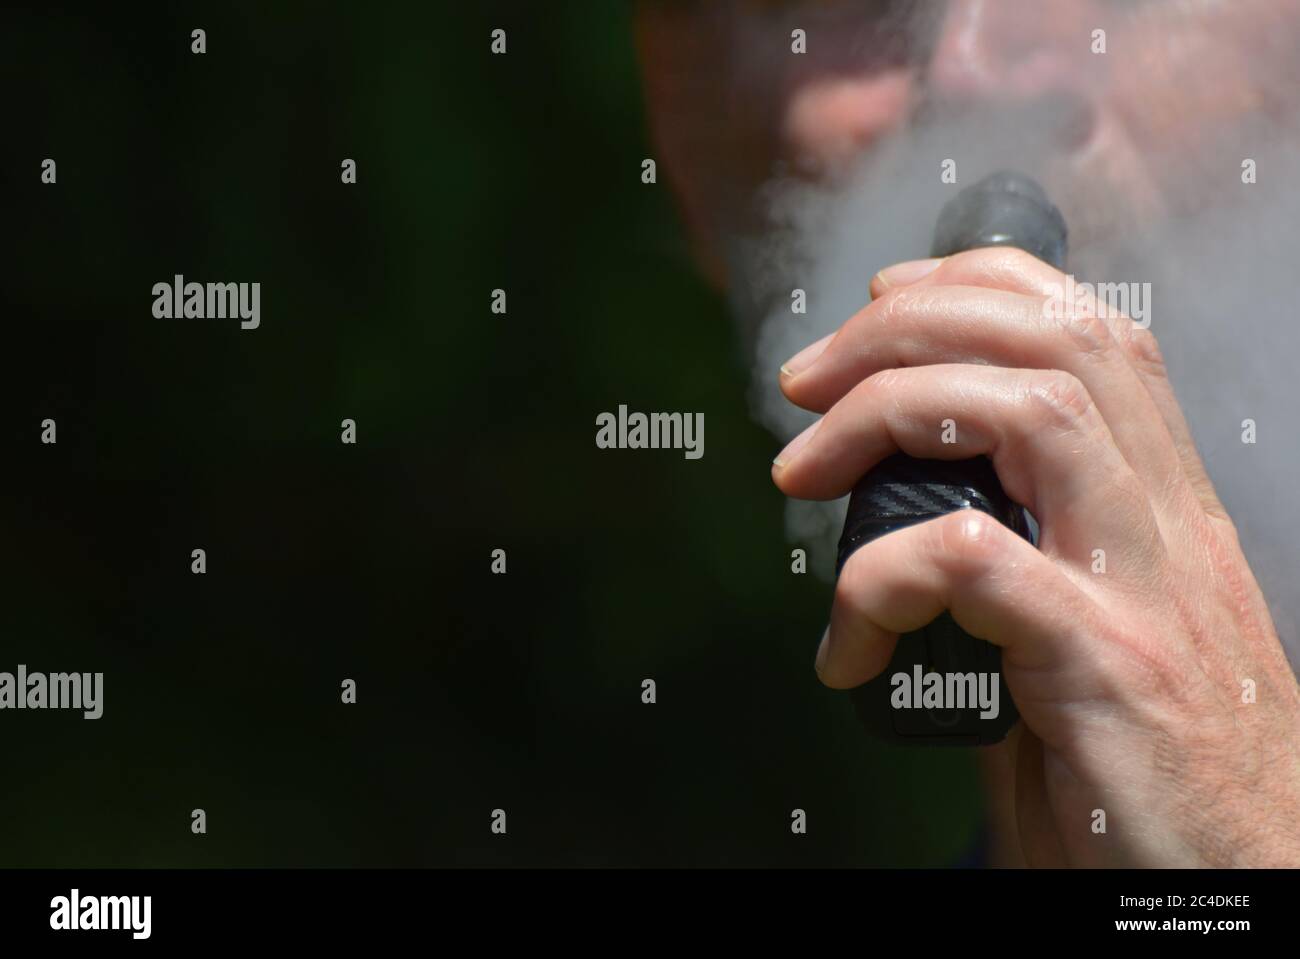 A man vaping with focus on his hand as he holds the e cigarette / vape mod up to his mouth while exhaling vapour Stock Photo